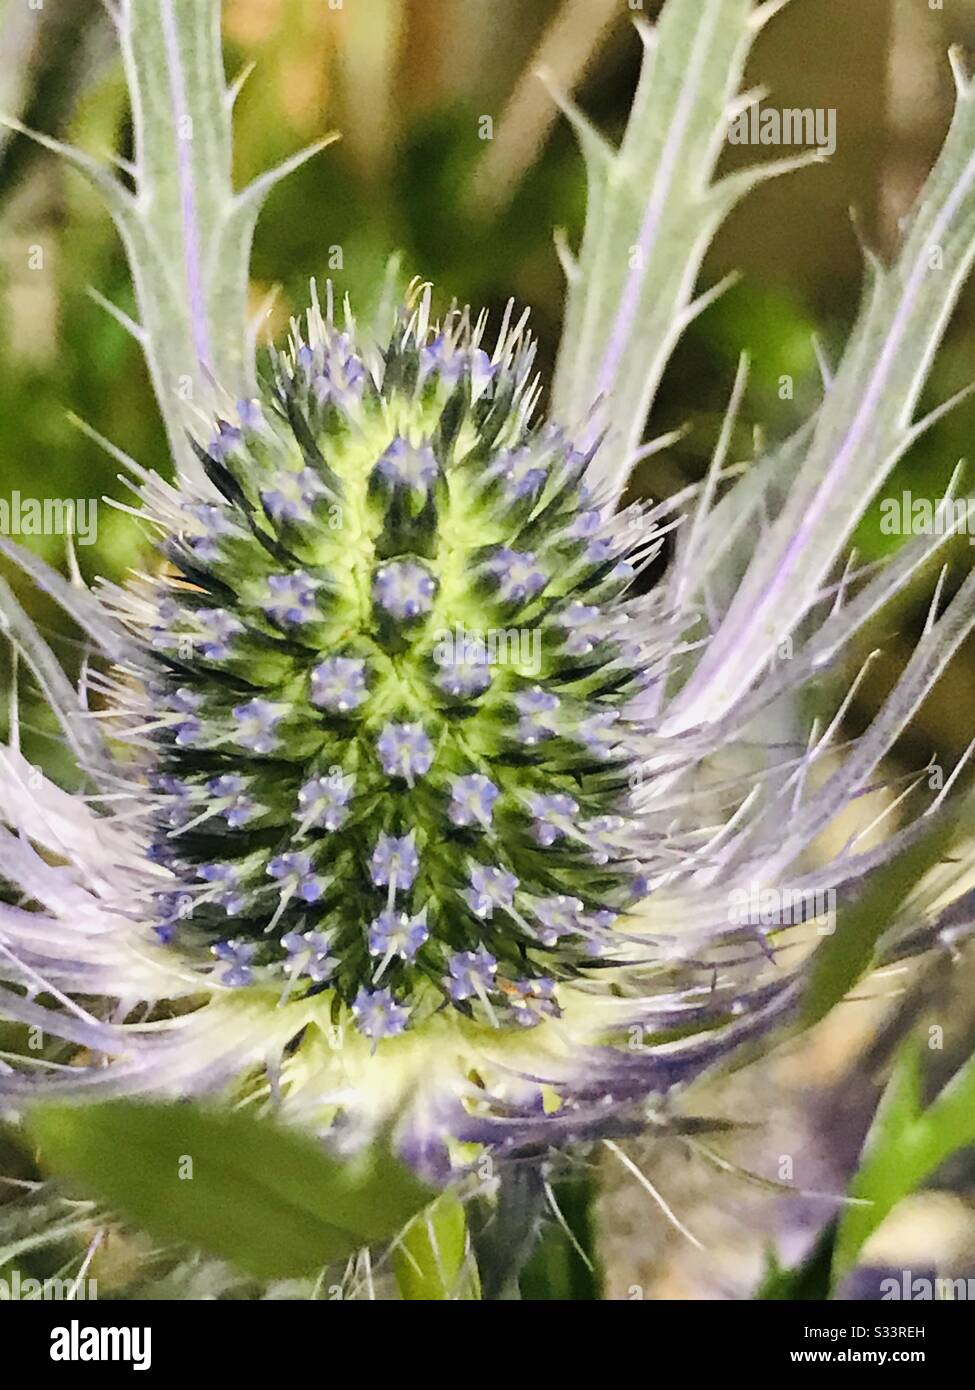 steel blue sea holly aka eryngium amethystinium ,Fresh flowers of purple Thistle flowers ready for bouquet-used as dried flowers-leaves with sharp prickles on the margins,blue thistle flower-close up Stock Photo